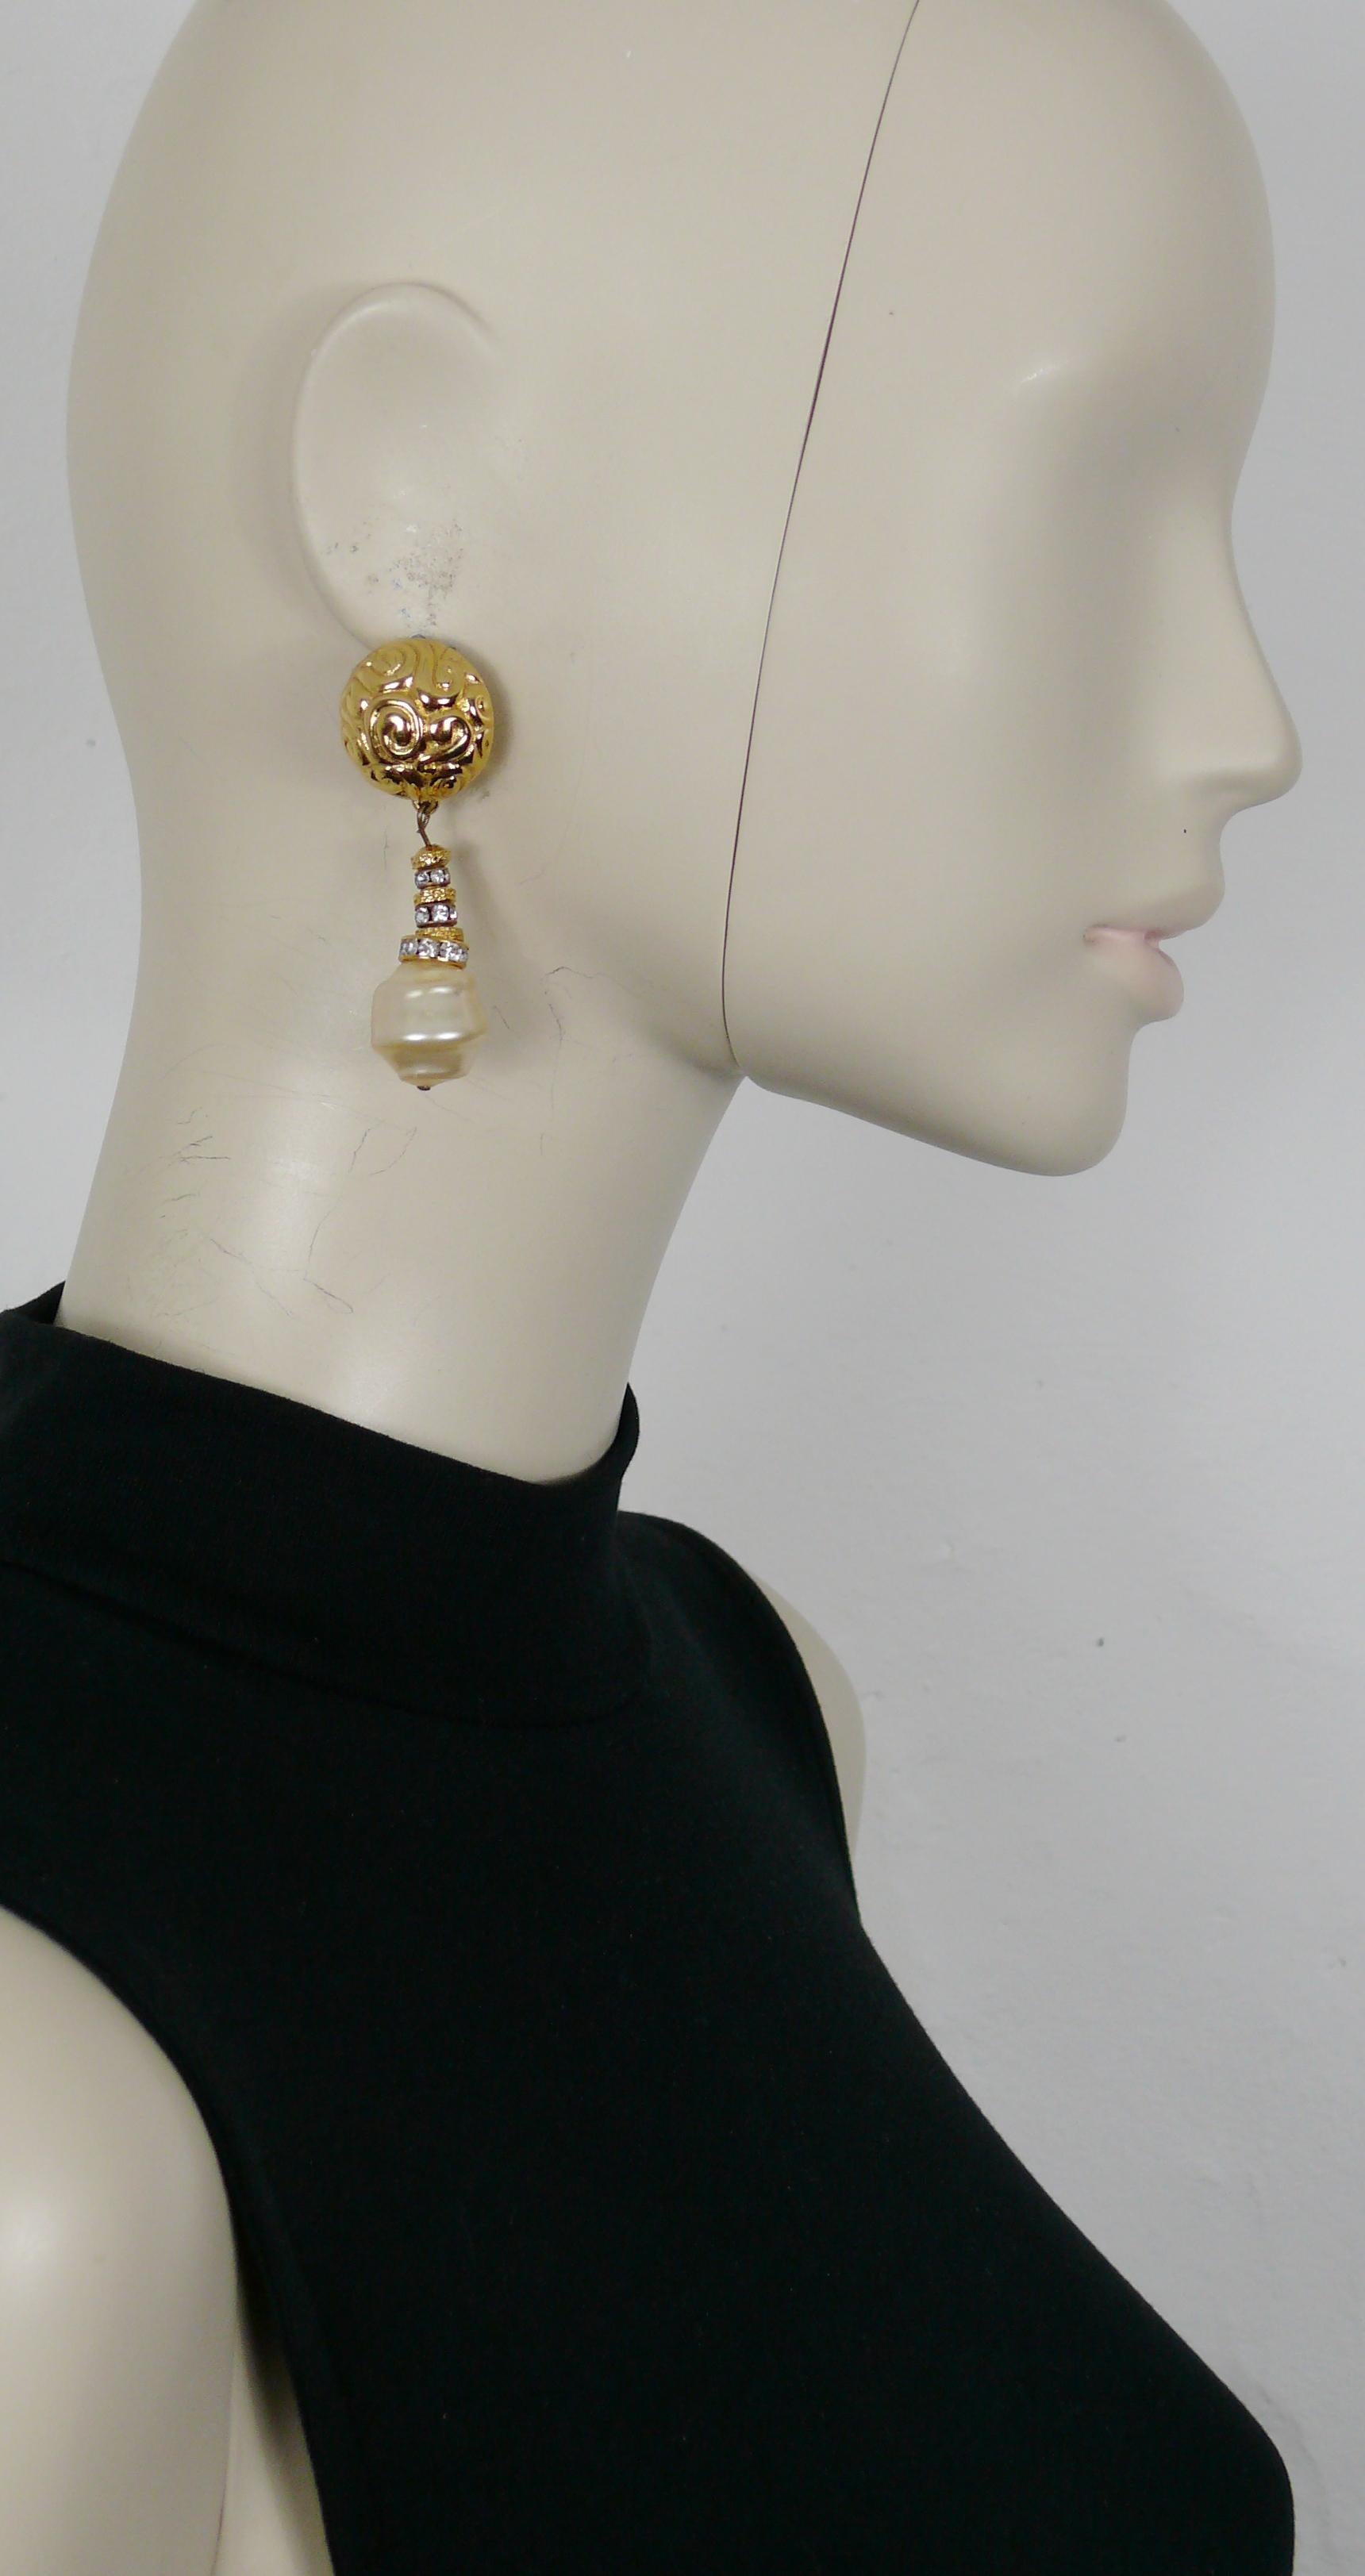 YVES SAINT LAURENT vintage gold toned dangling earrings (clip-on) featuring an arabesque design domed top and a large baroque faux pearl drop embellished with clear crystal rondelles.

Embossed YSL Made in France.

Indicative measurements : height